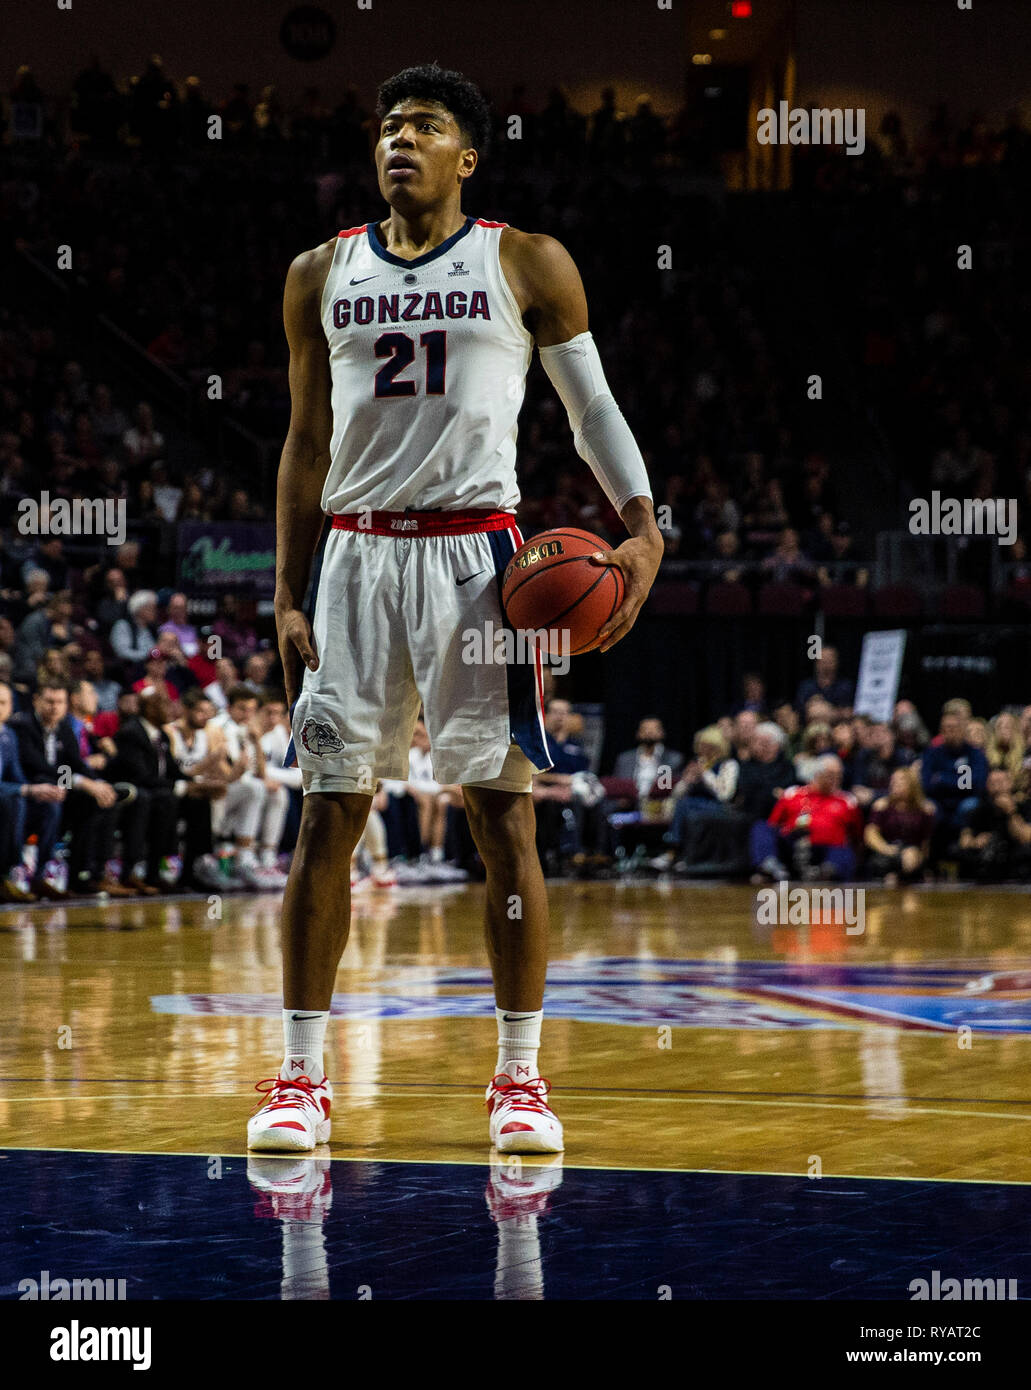 Mar 12 2019 Las Vegas, NV, U.S.A. Gonzaga forward Rui Hachimura (21) at the free throw line during the NCAA West Coast Conference Men's Basketball Tournament championship between the Gonzaga Bulldogs and the Saint Mary's Gaels 47-60 lost at Orleans Arena Las Vegas, NV. Thurman James/CSM Stock Photo